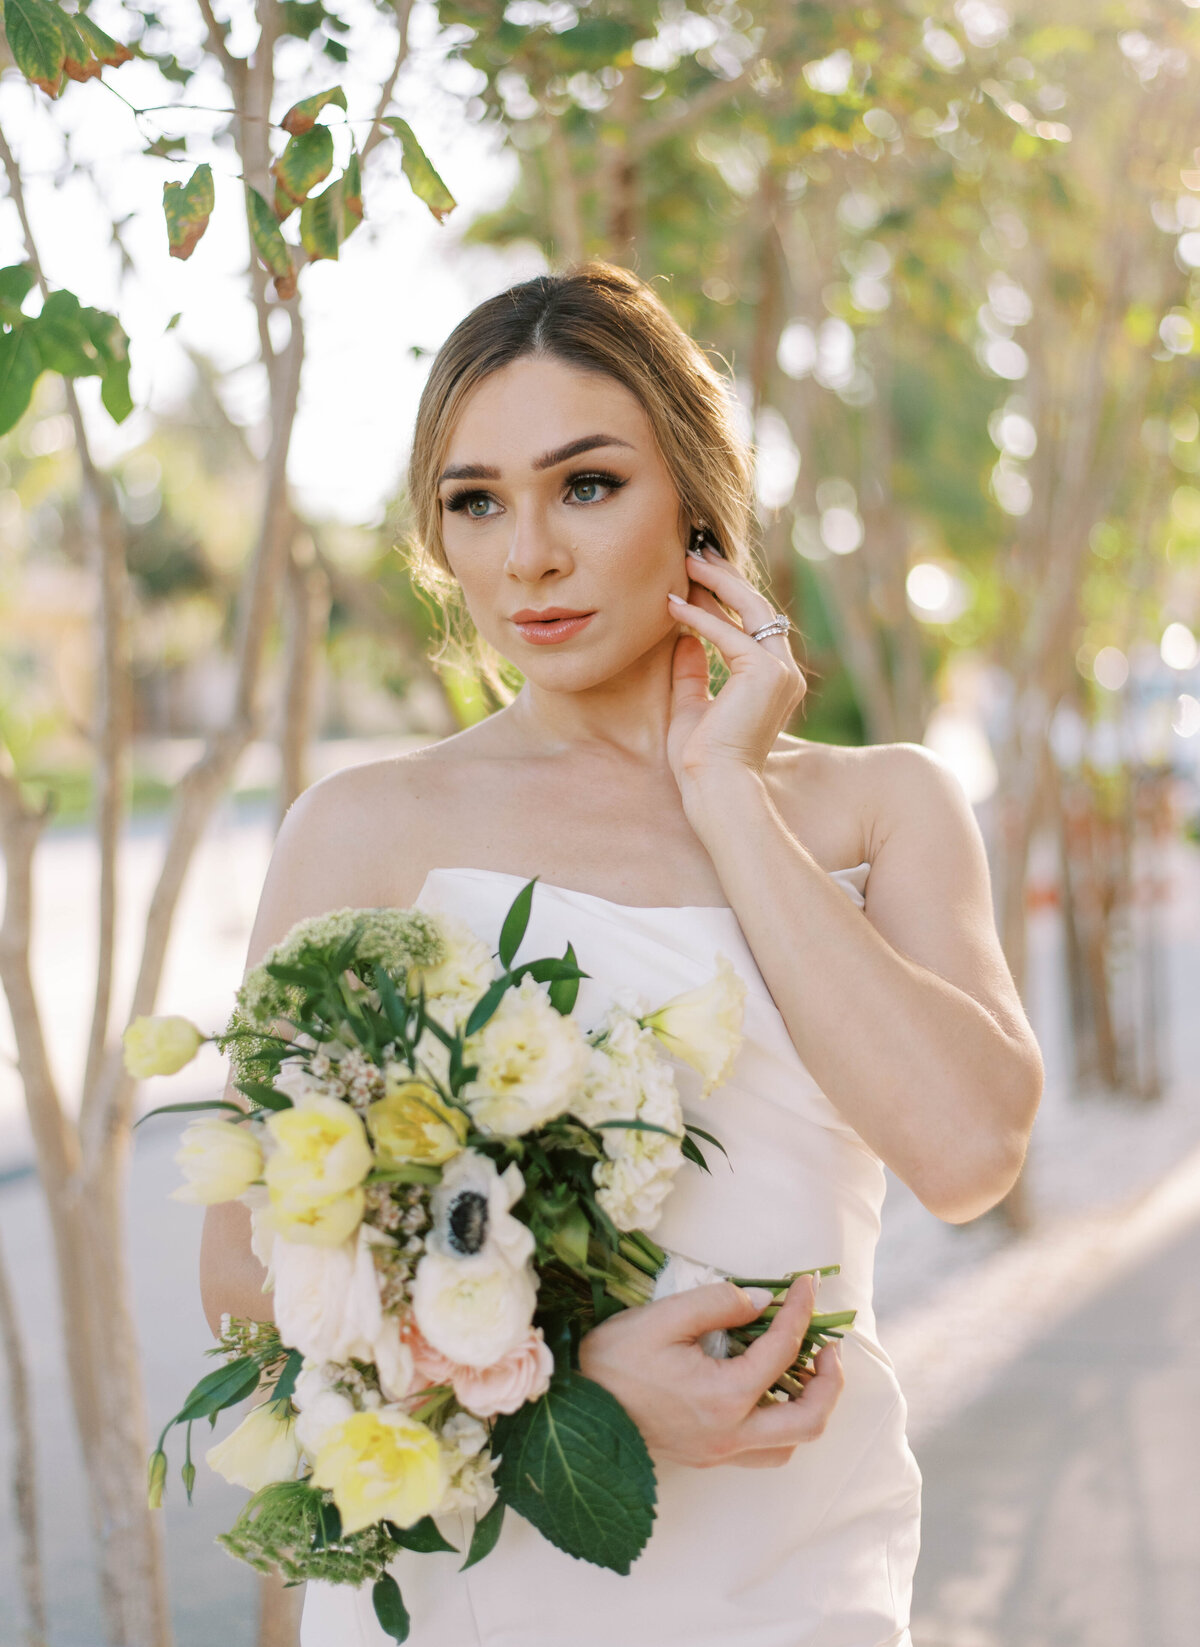 bridal portraits with strapless wedding gown holding greenery and white bouquet